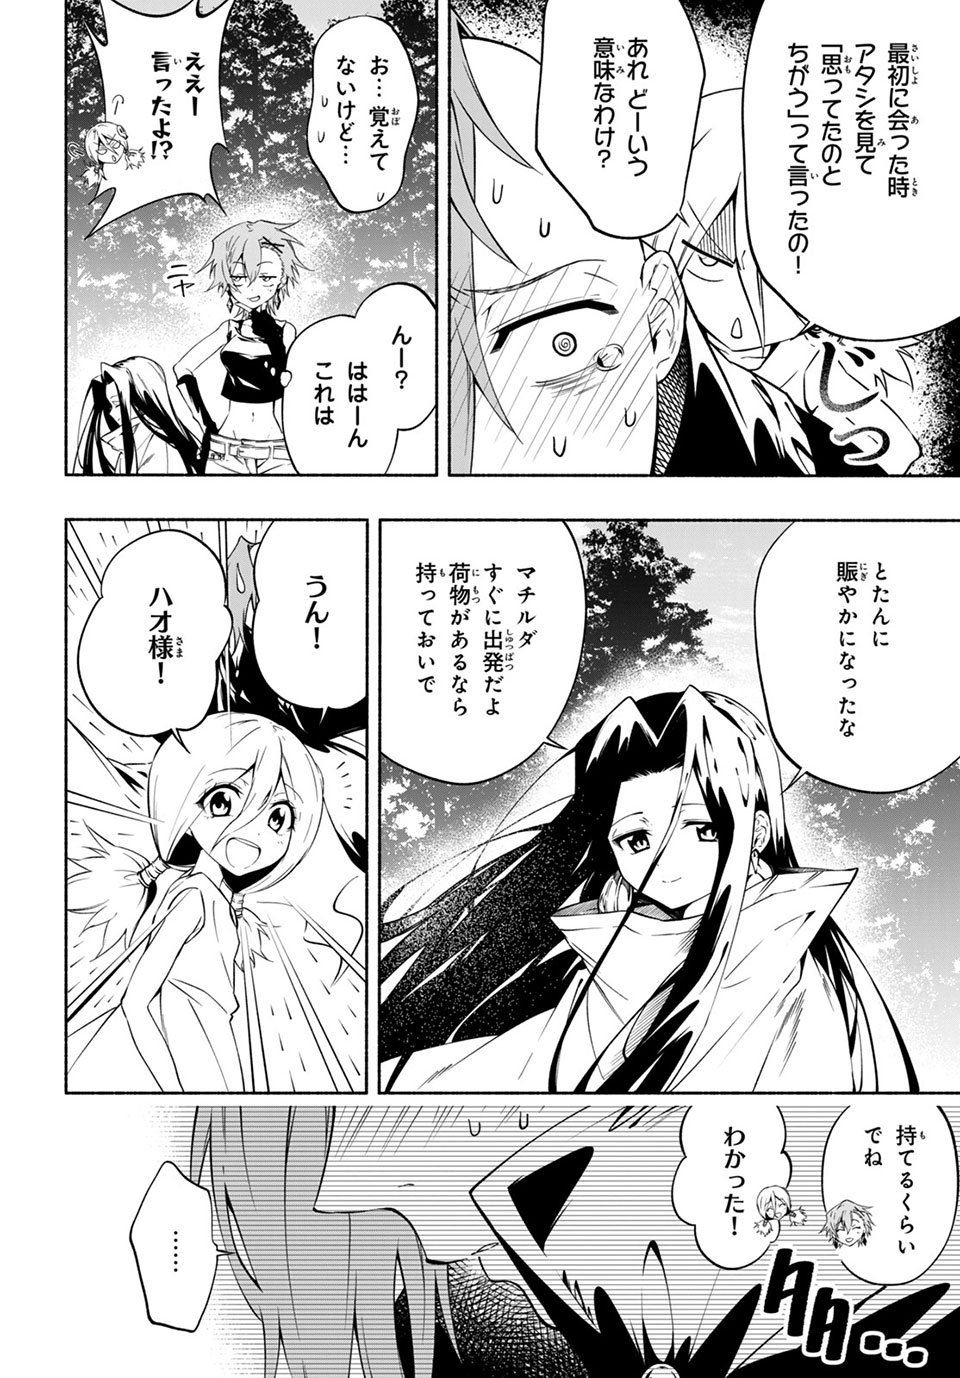 Shaman King: and a garden 第10.4話 - Page 4